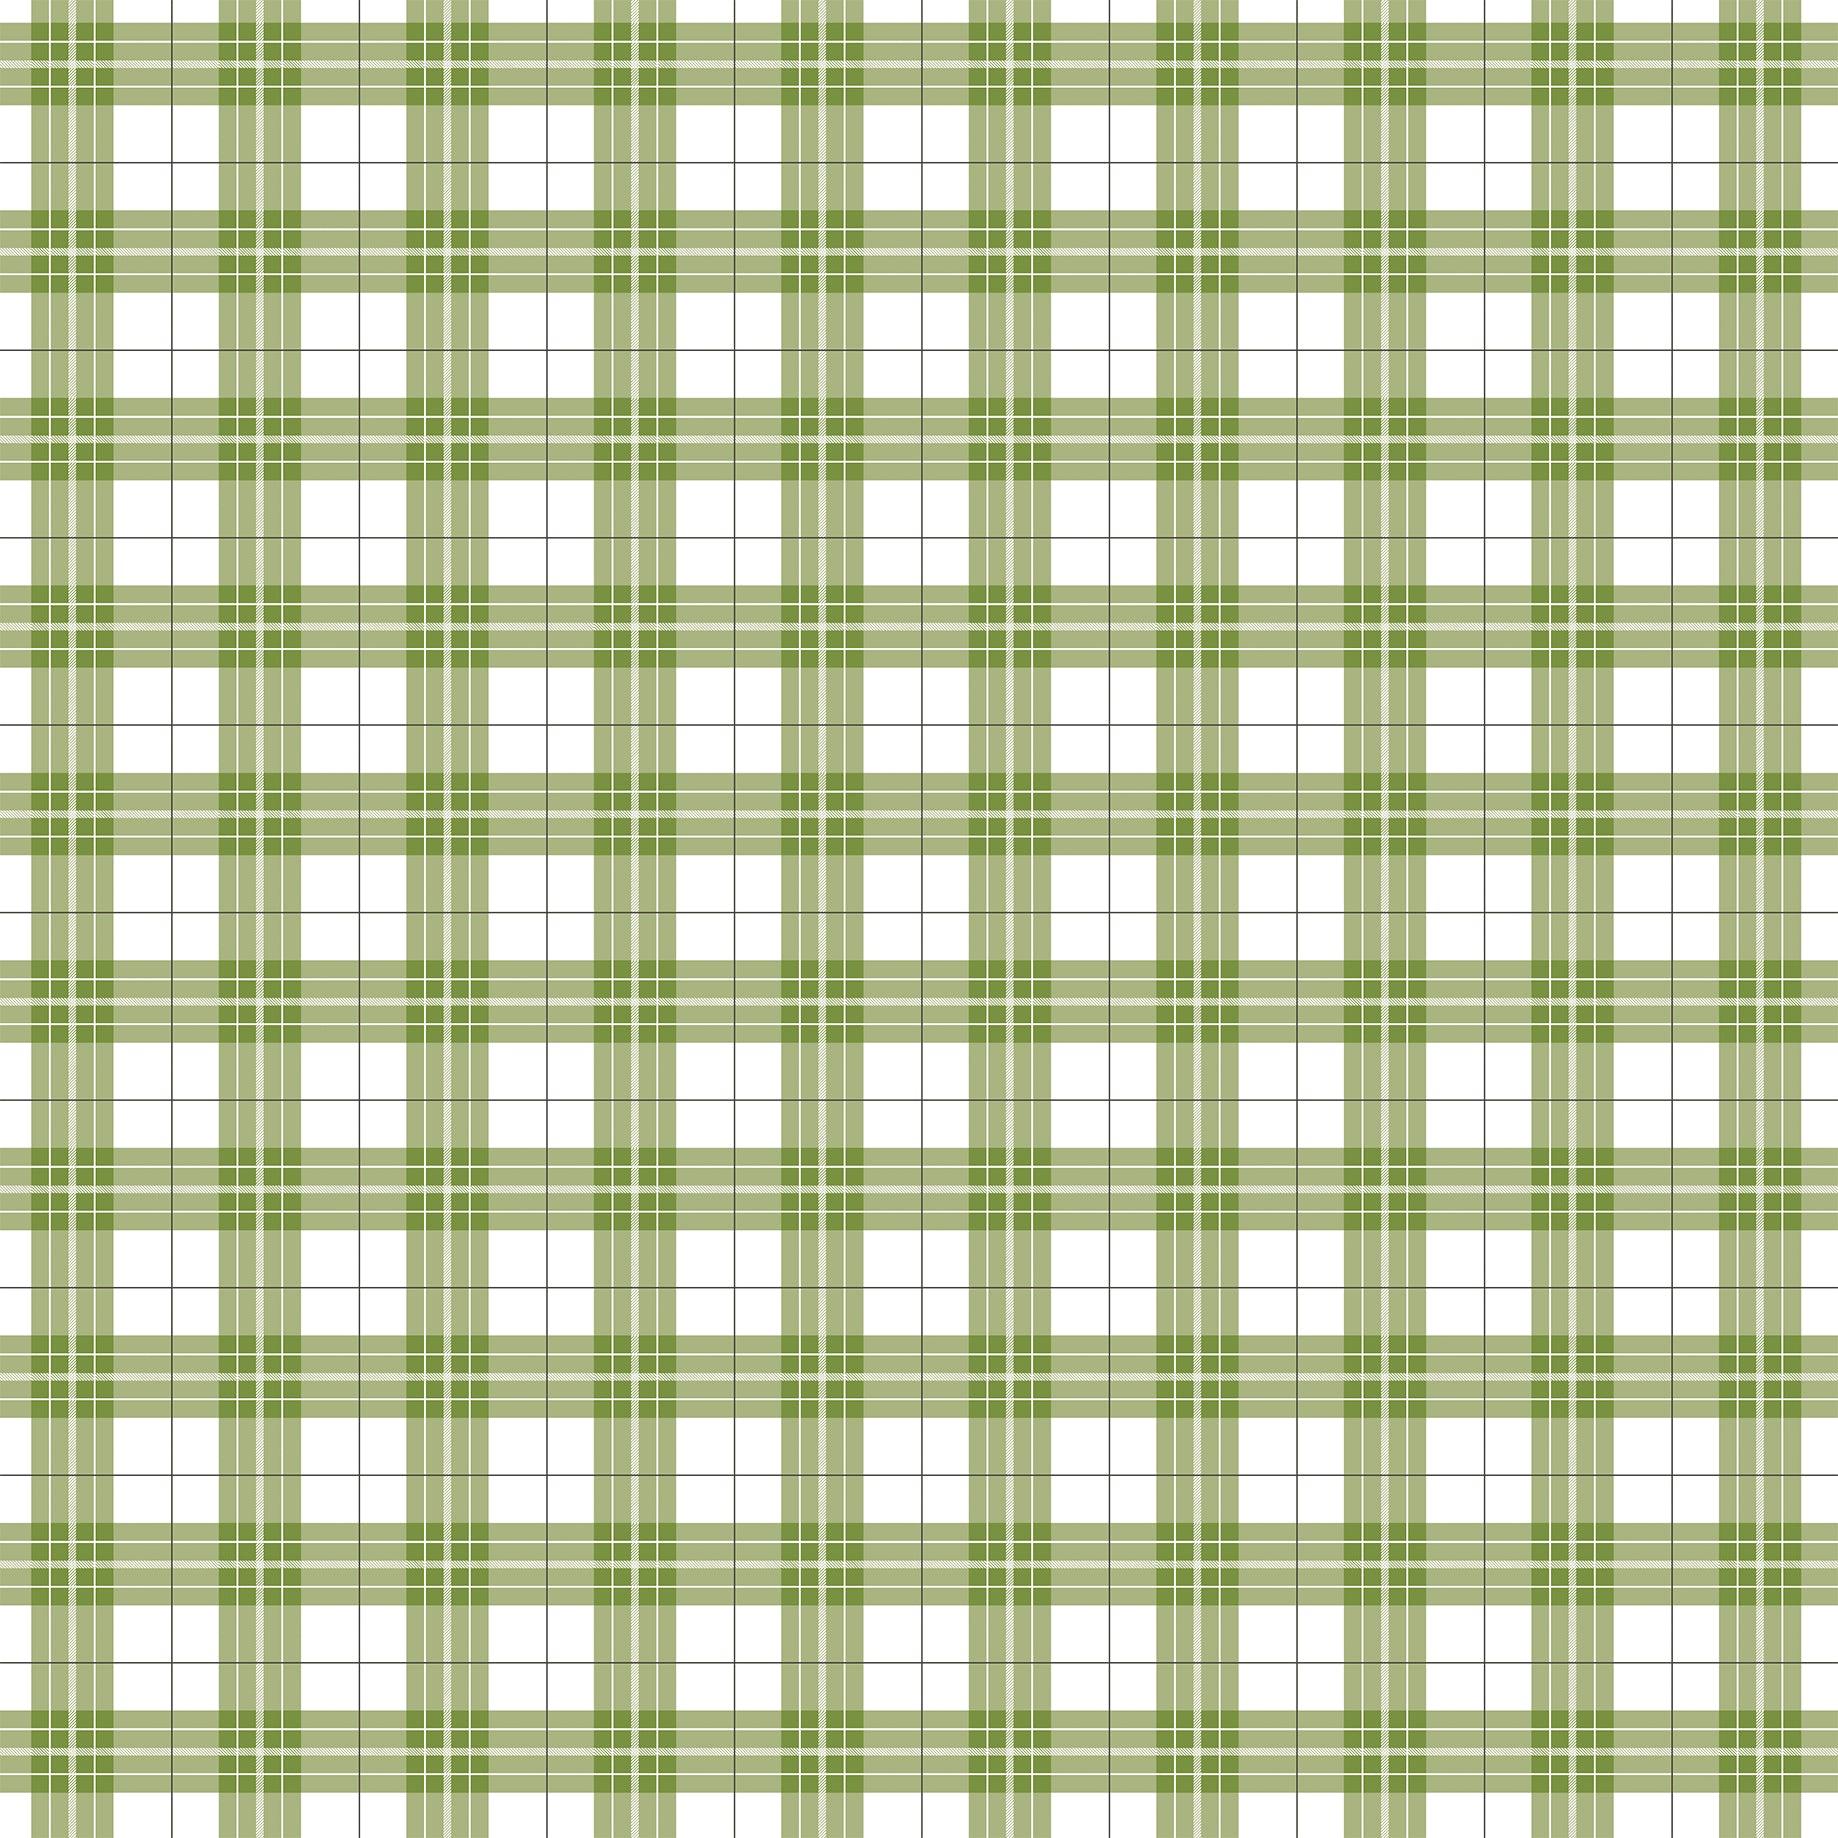 Farmhouse Living Collection Country Plaid 12 x 12 Double-Sided Scrapbook Paper by Carta Bella - Scrapbook Supply Companies